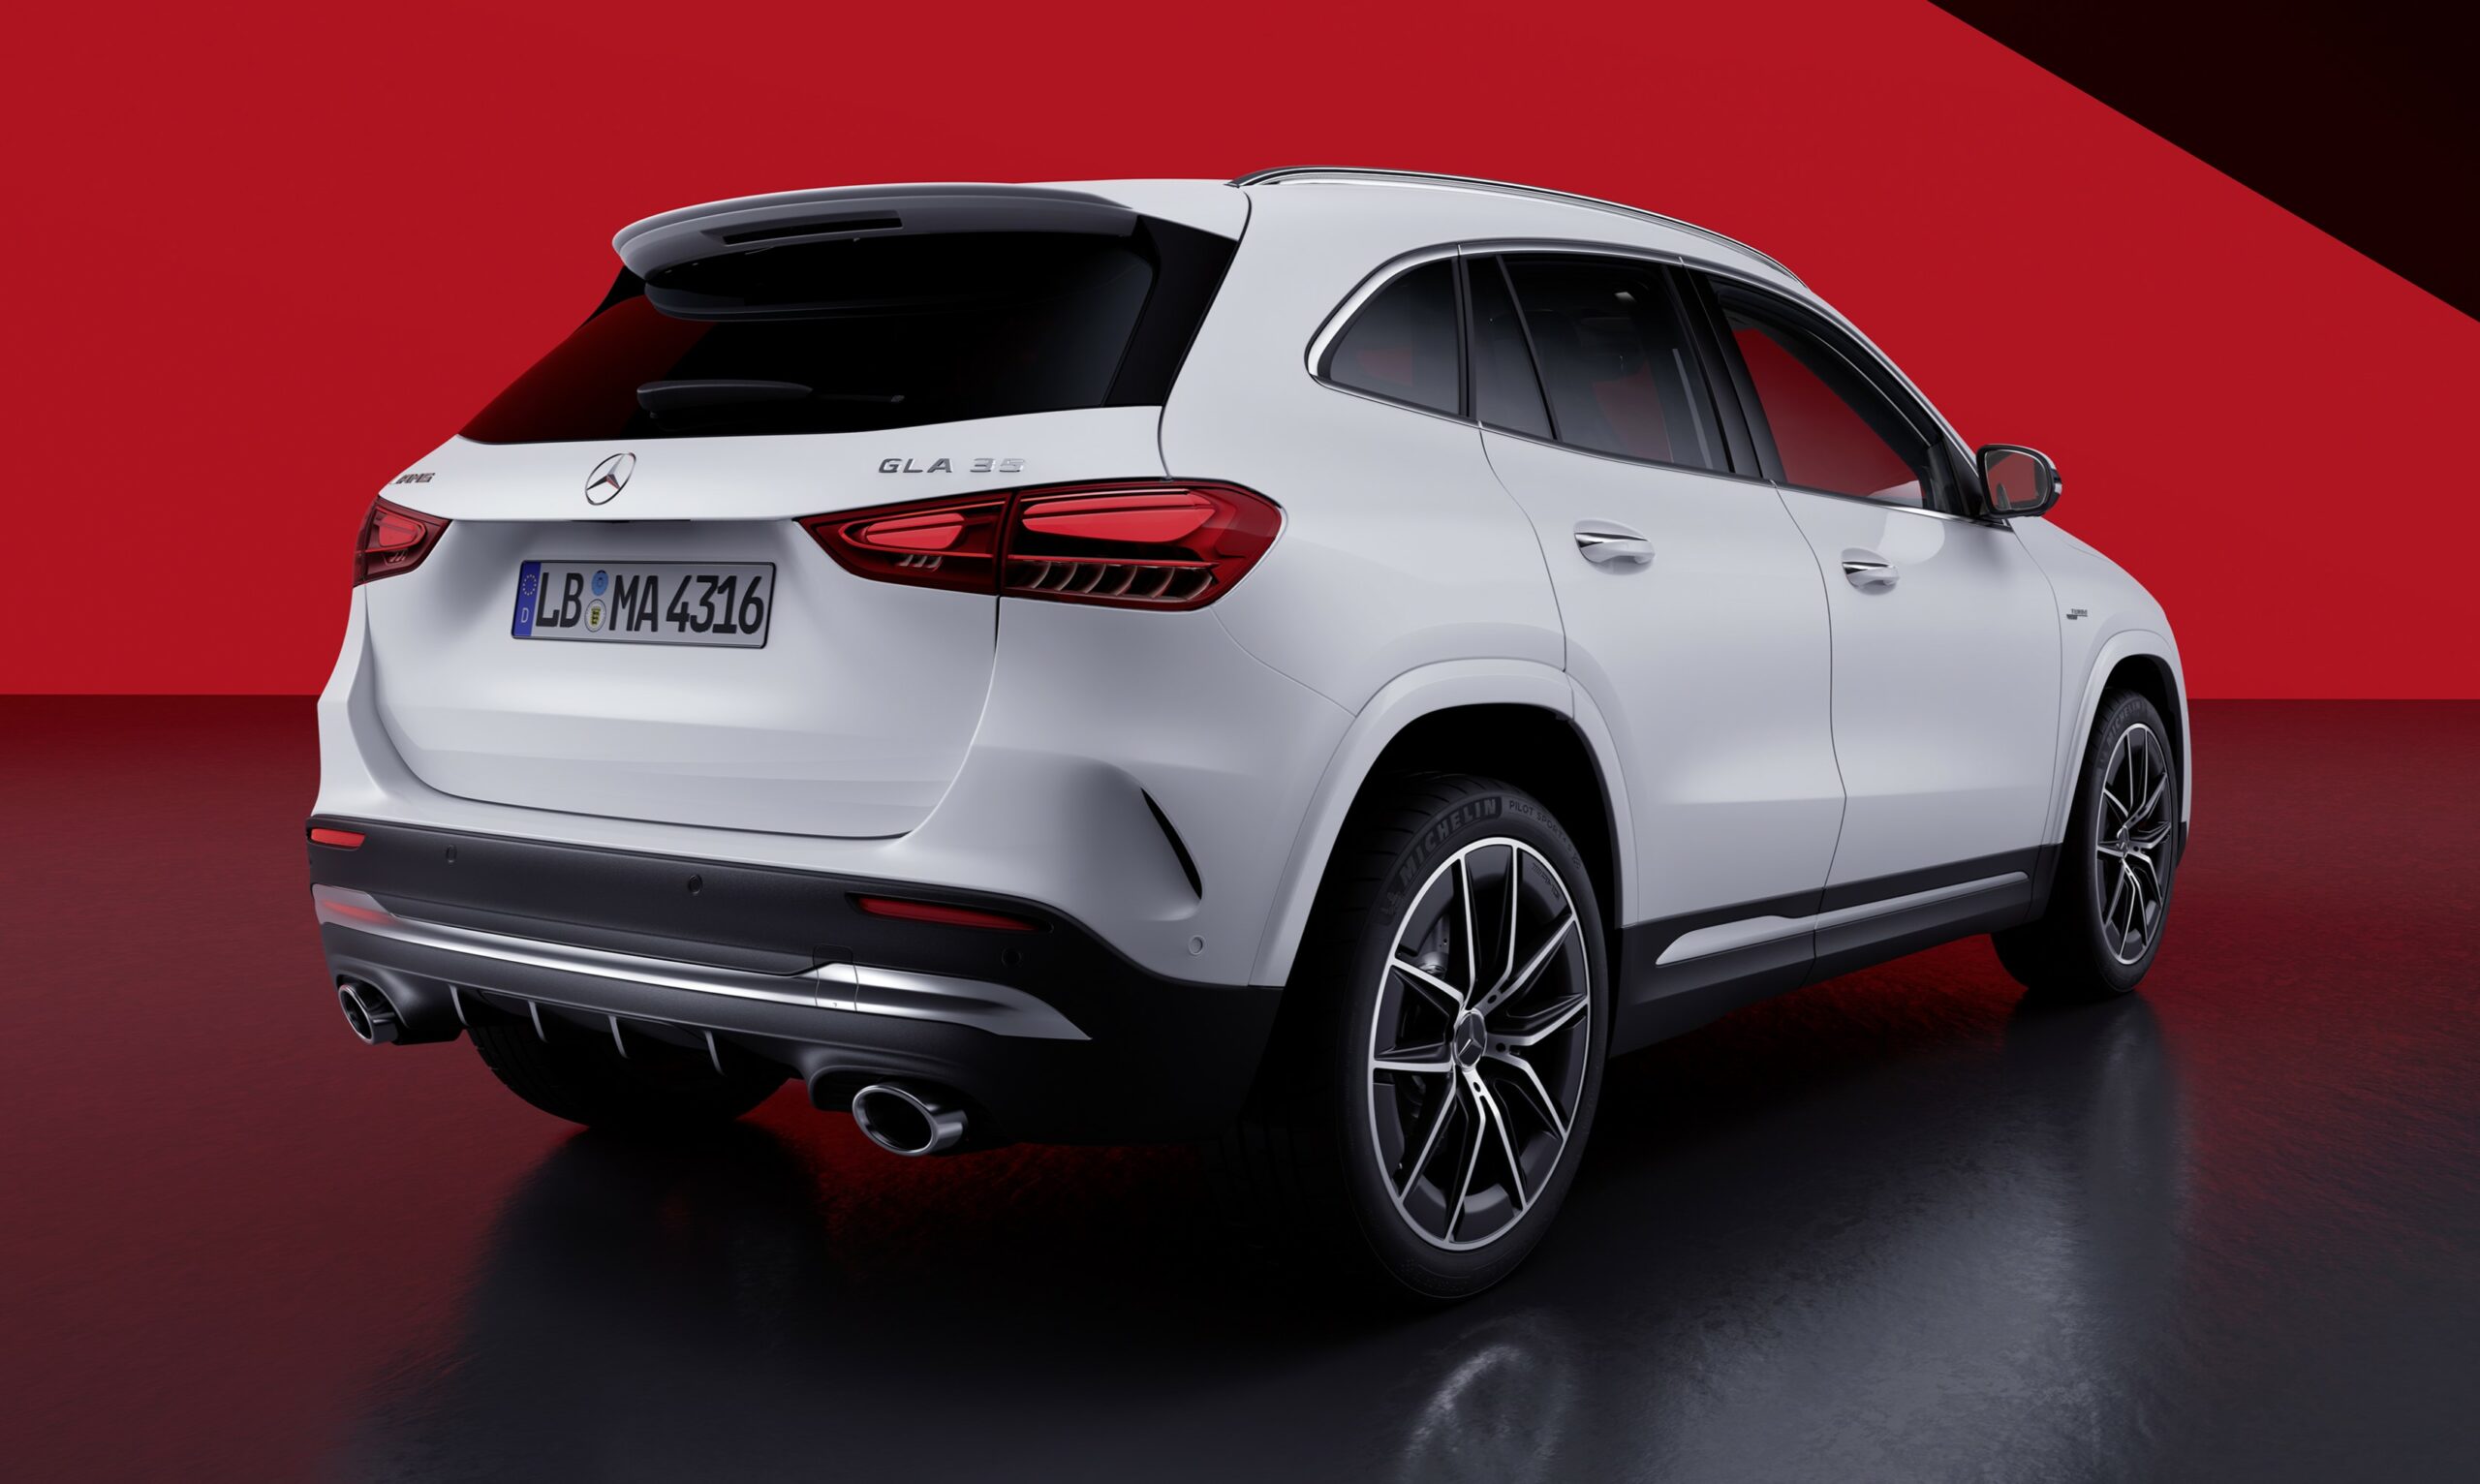 mercedes-benz, mercedes-benz gla, mercedes-benz gla undergoes mid-life update – what’s new